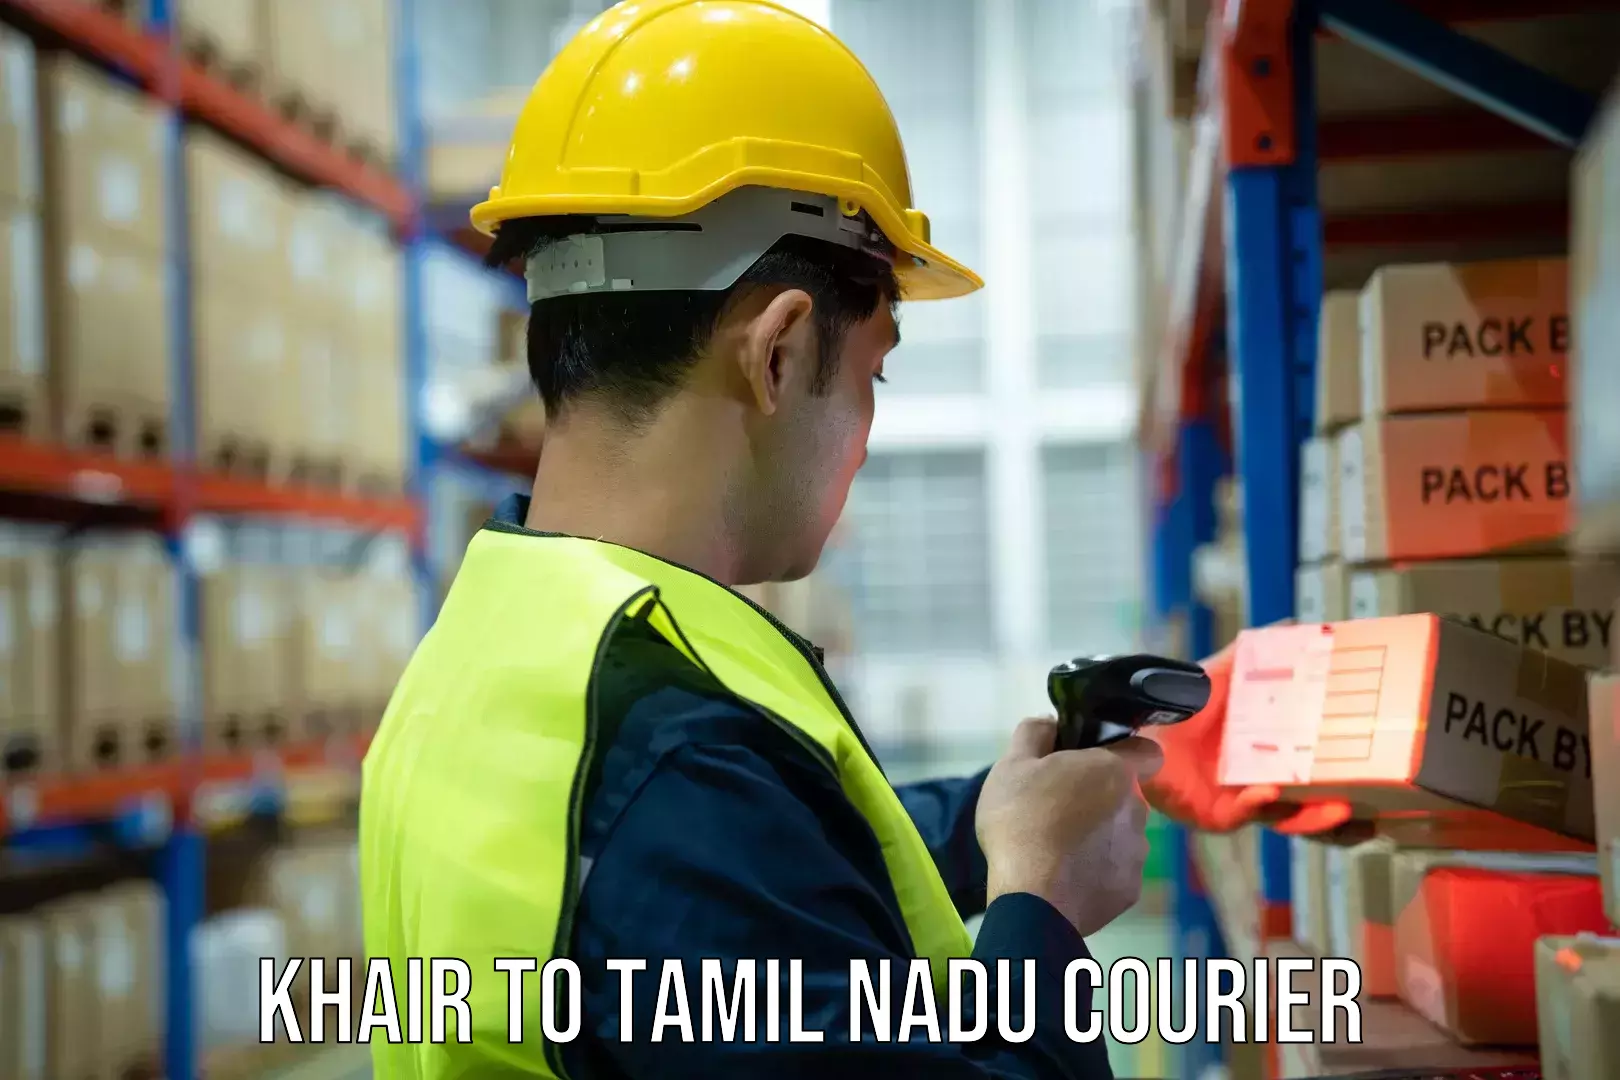 Local delivery service Khair to Tamil Nadu